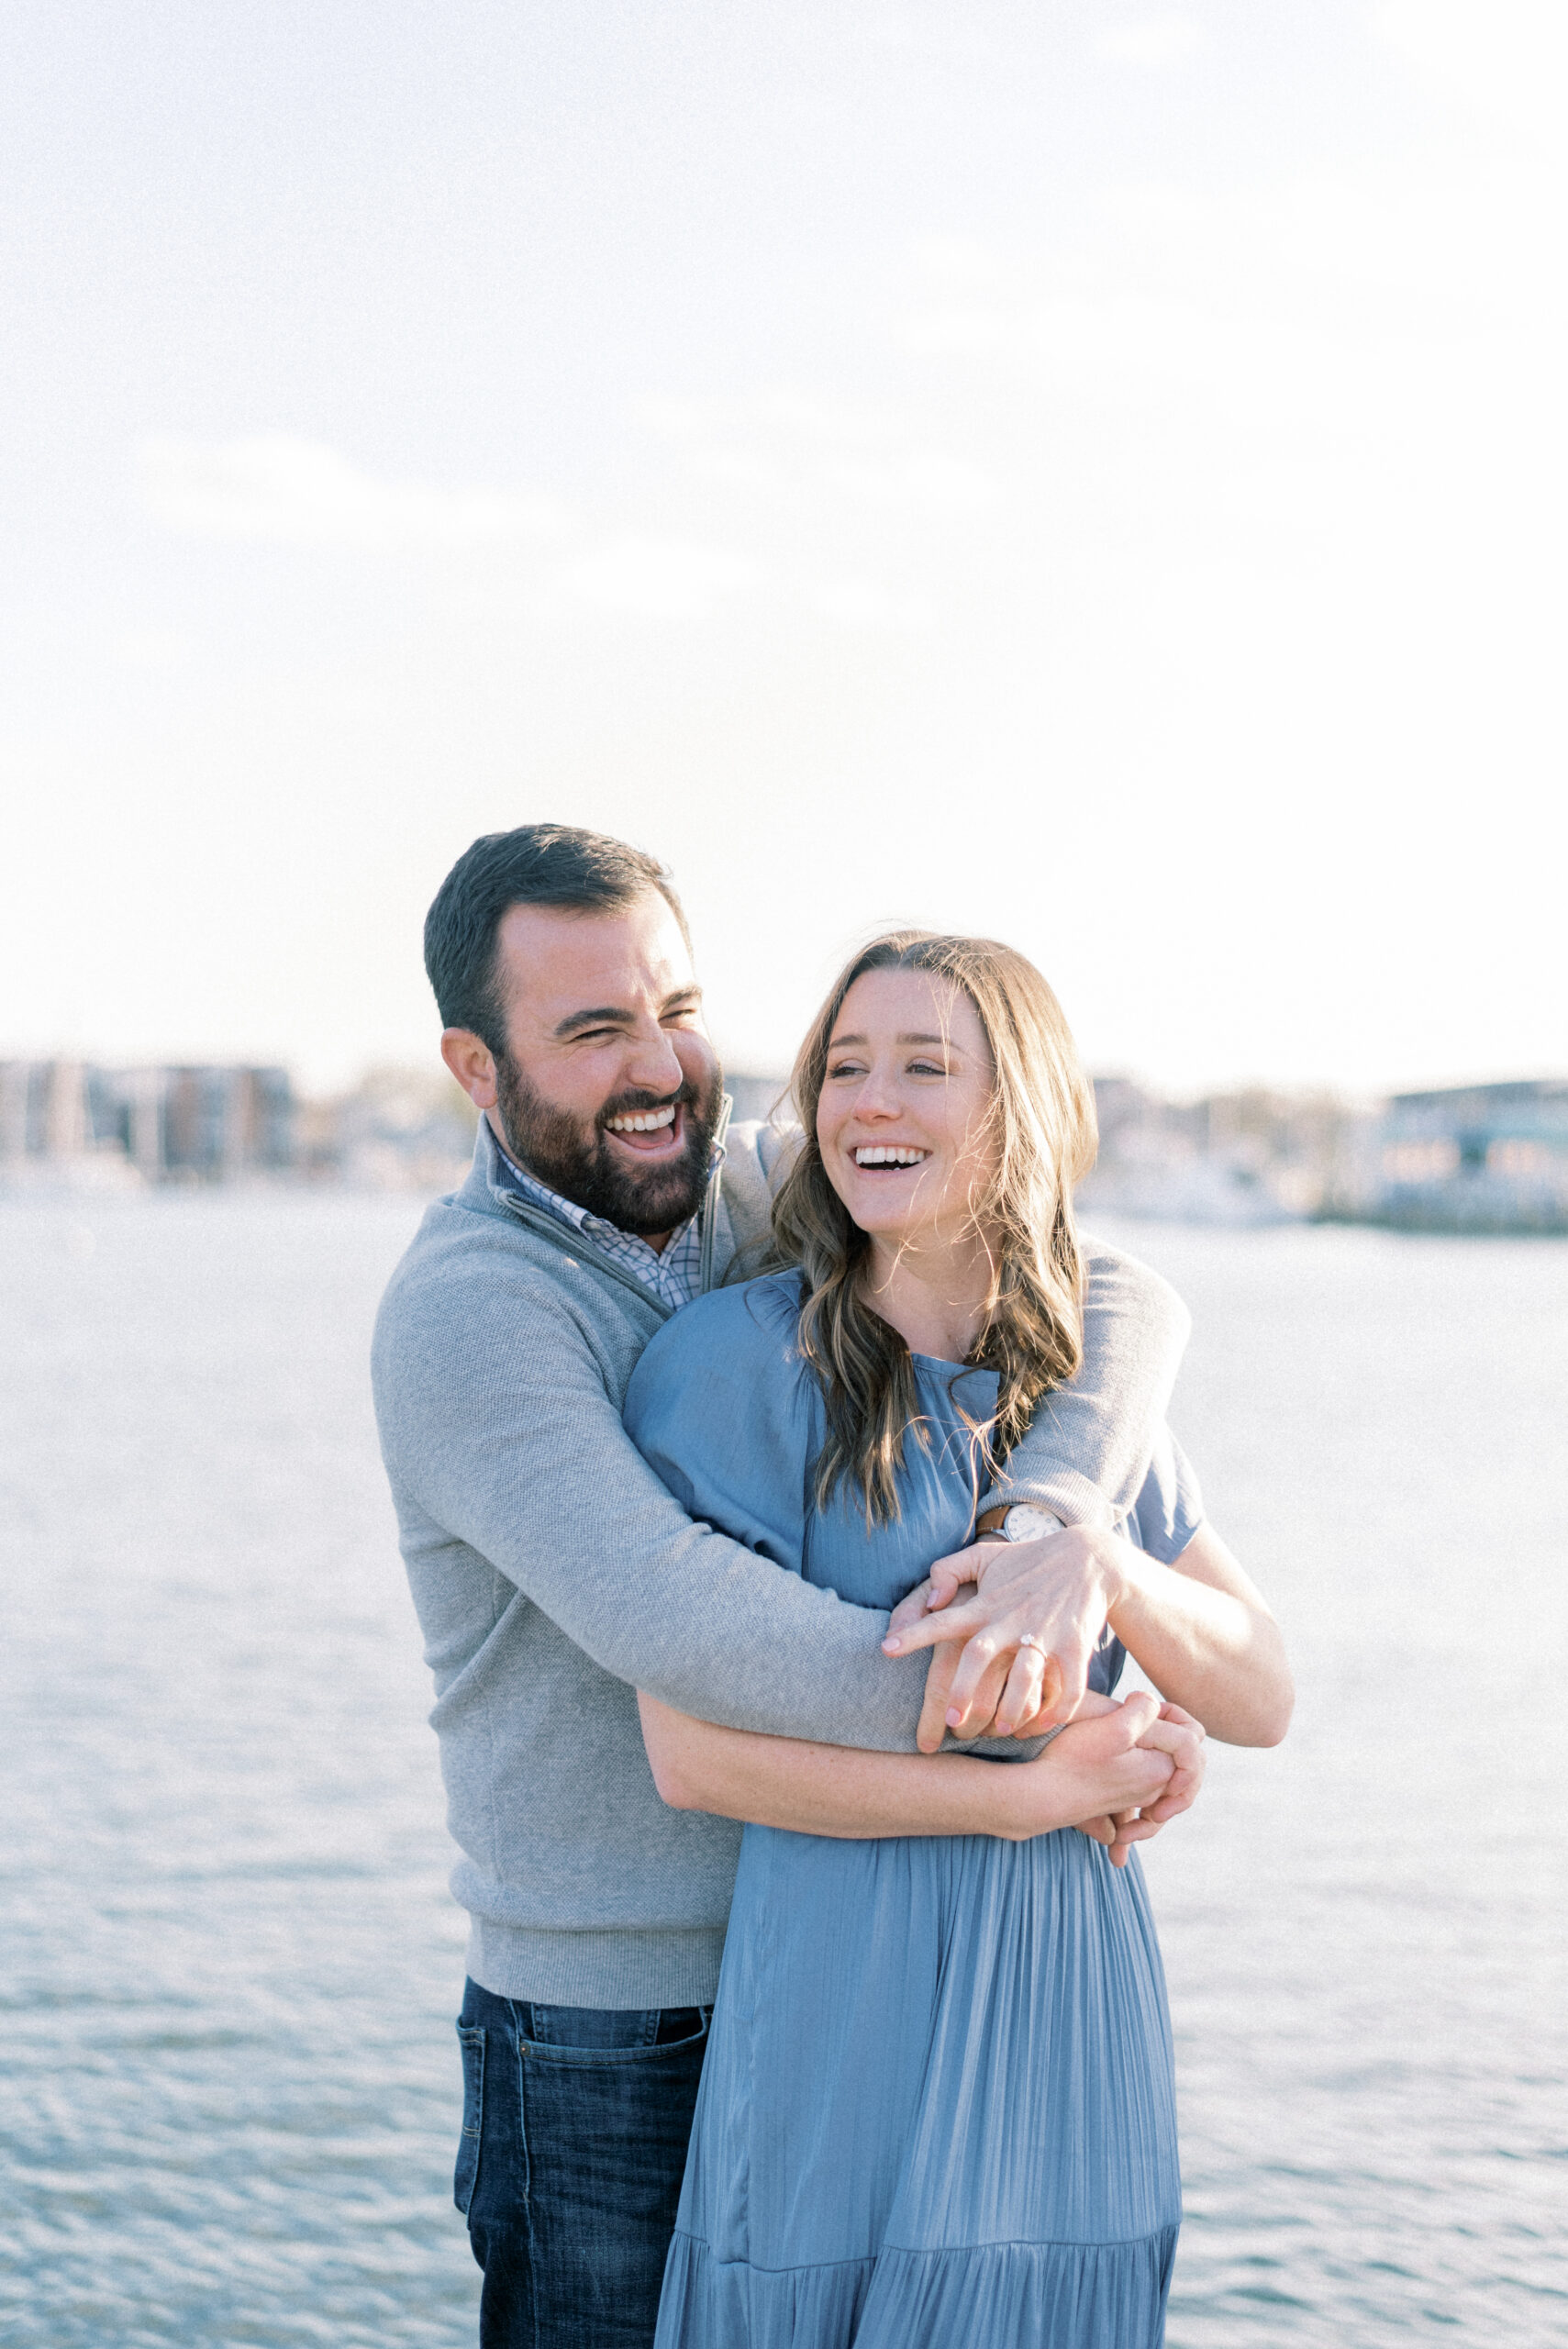 Maryland wedding photographer captures man and woman embracing and laughing during Sunset Downtown Annapolis Engagement Portraits